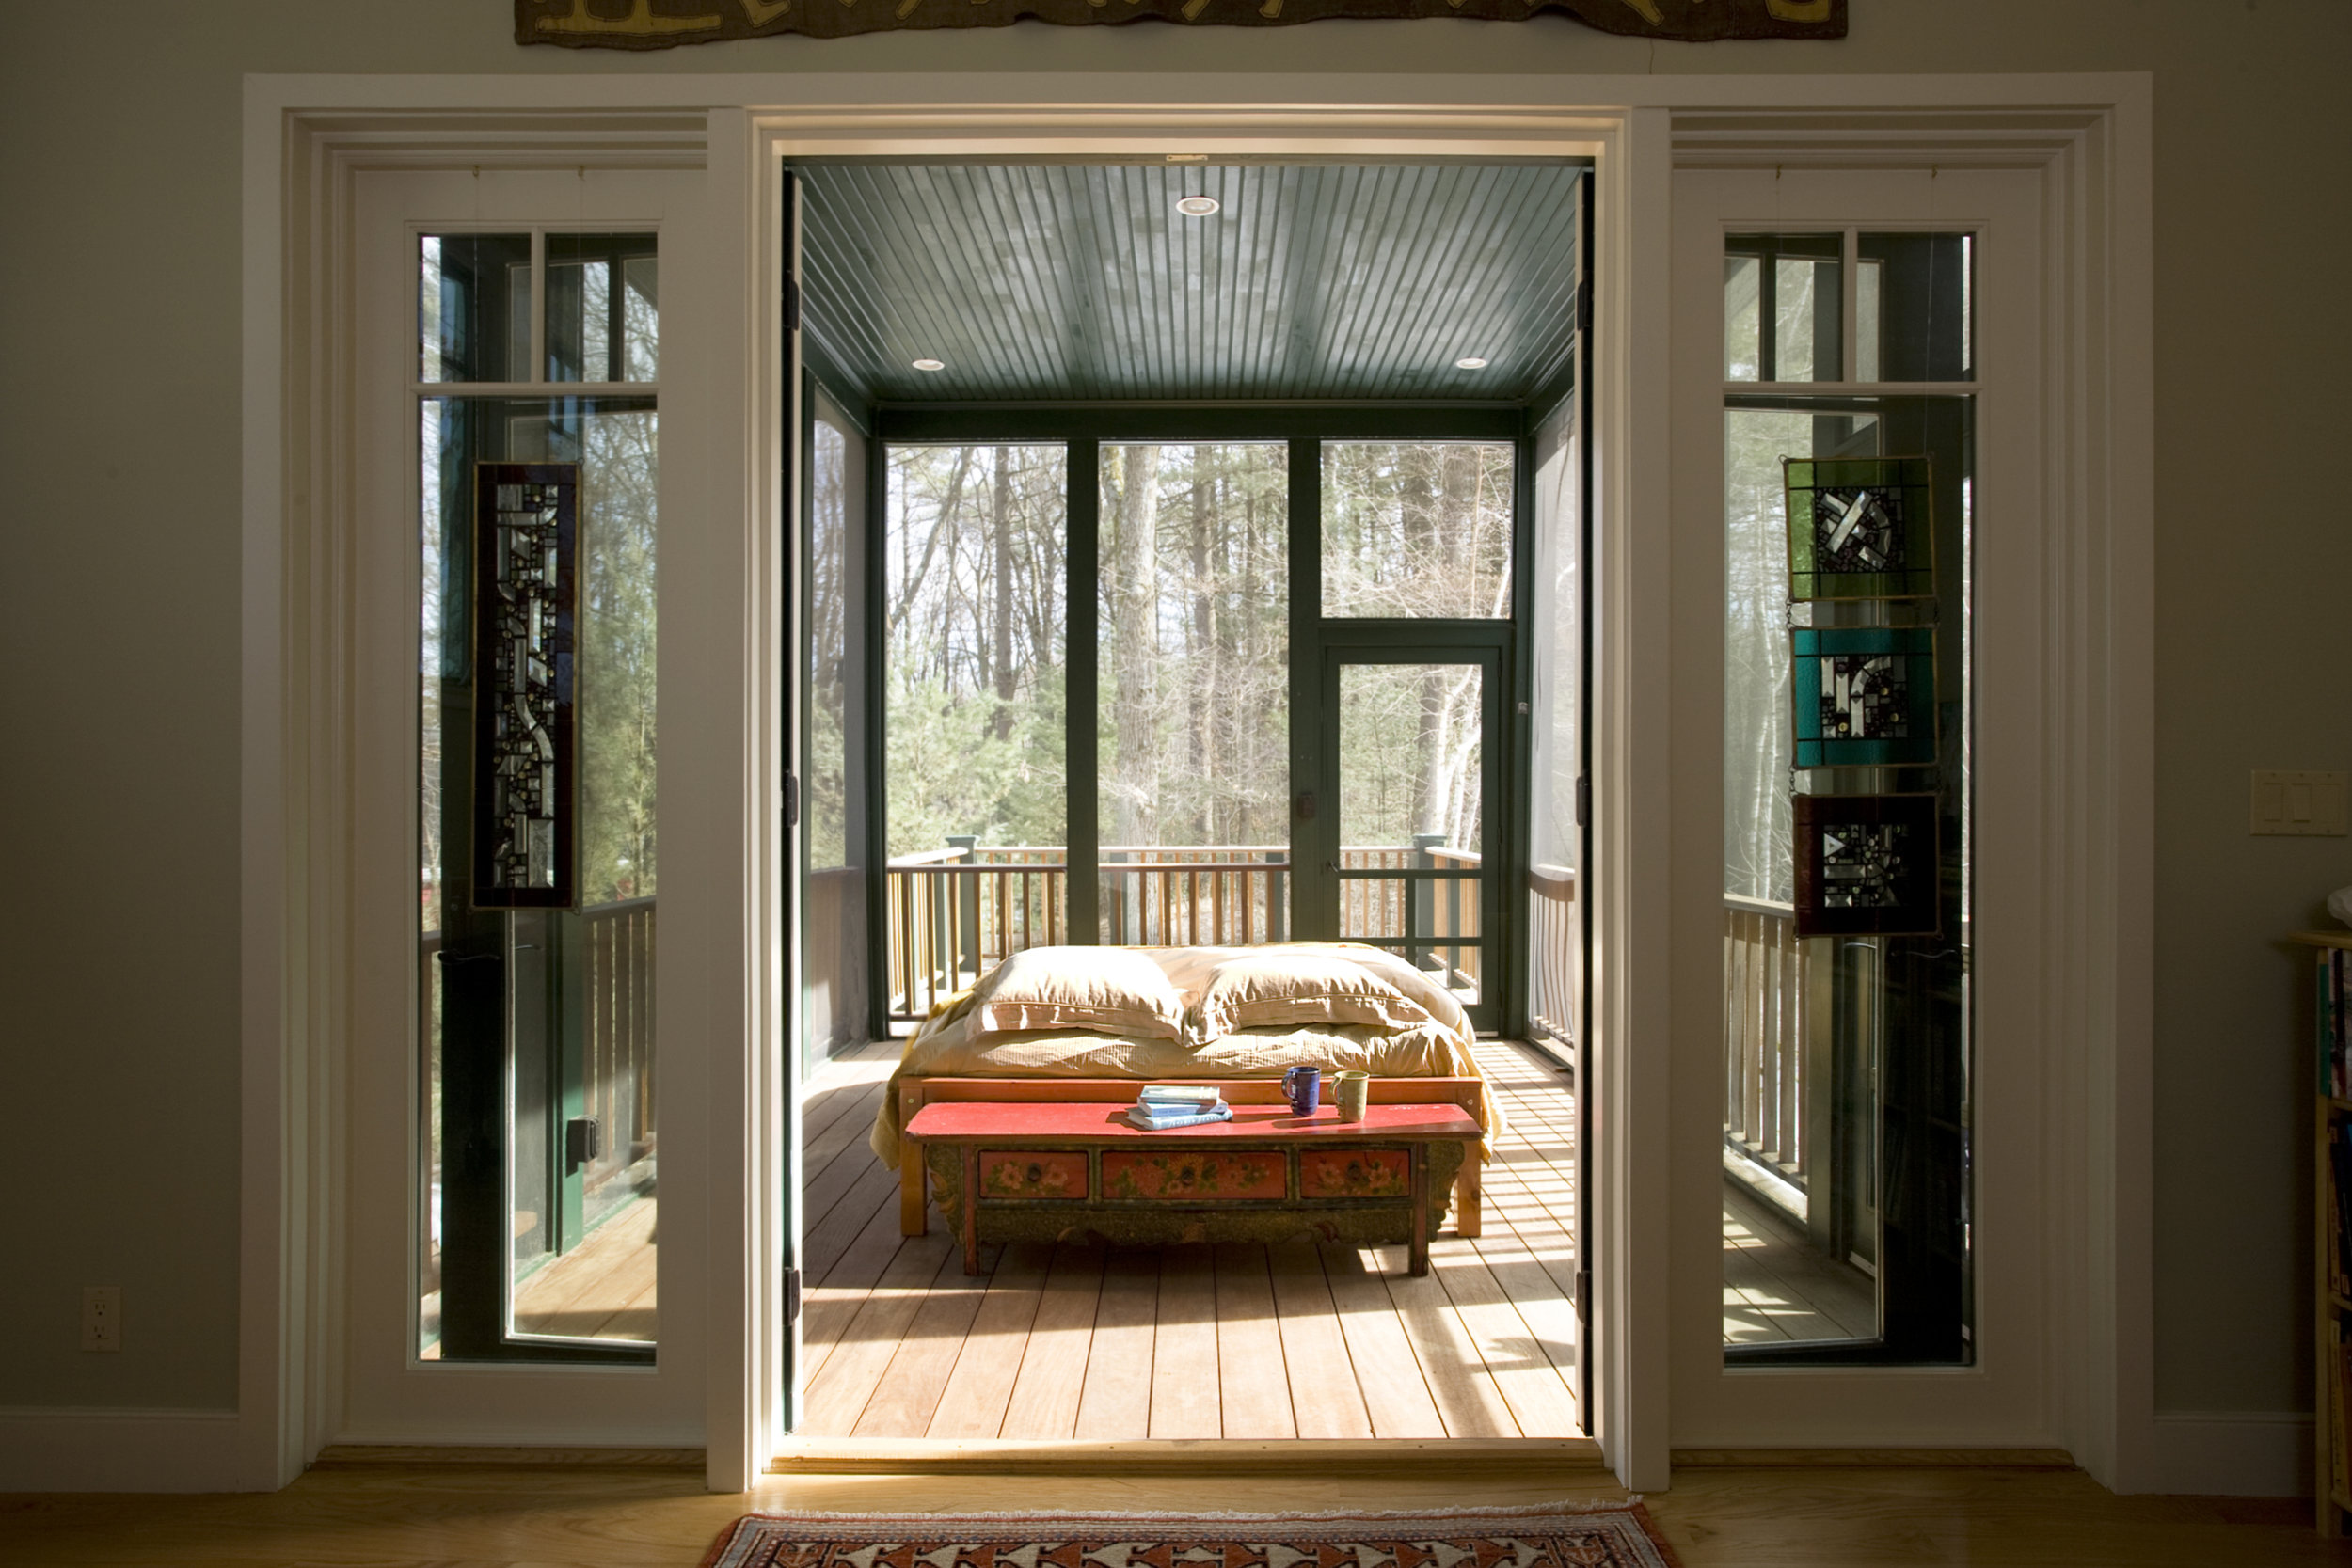 Screened in sleeping porch